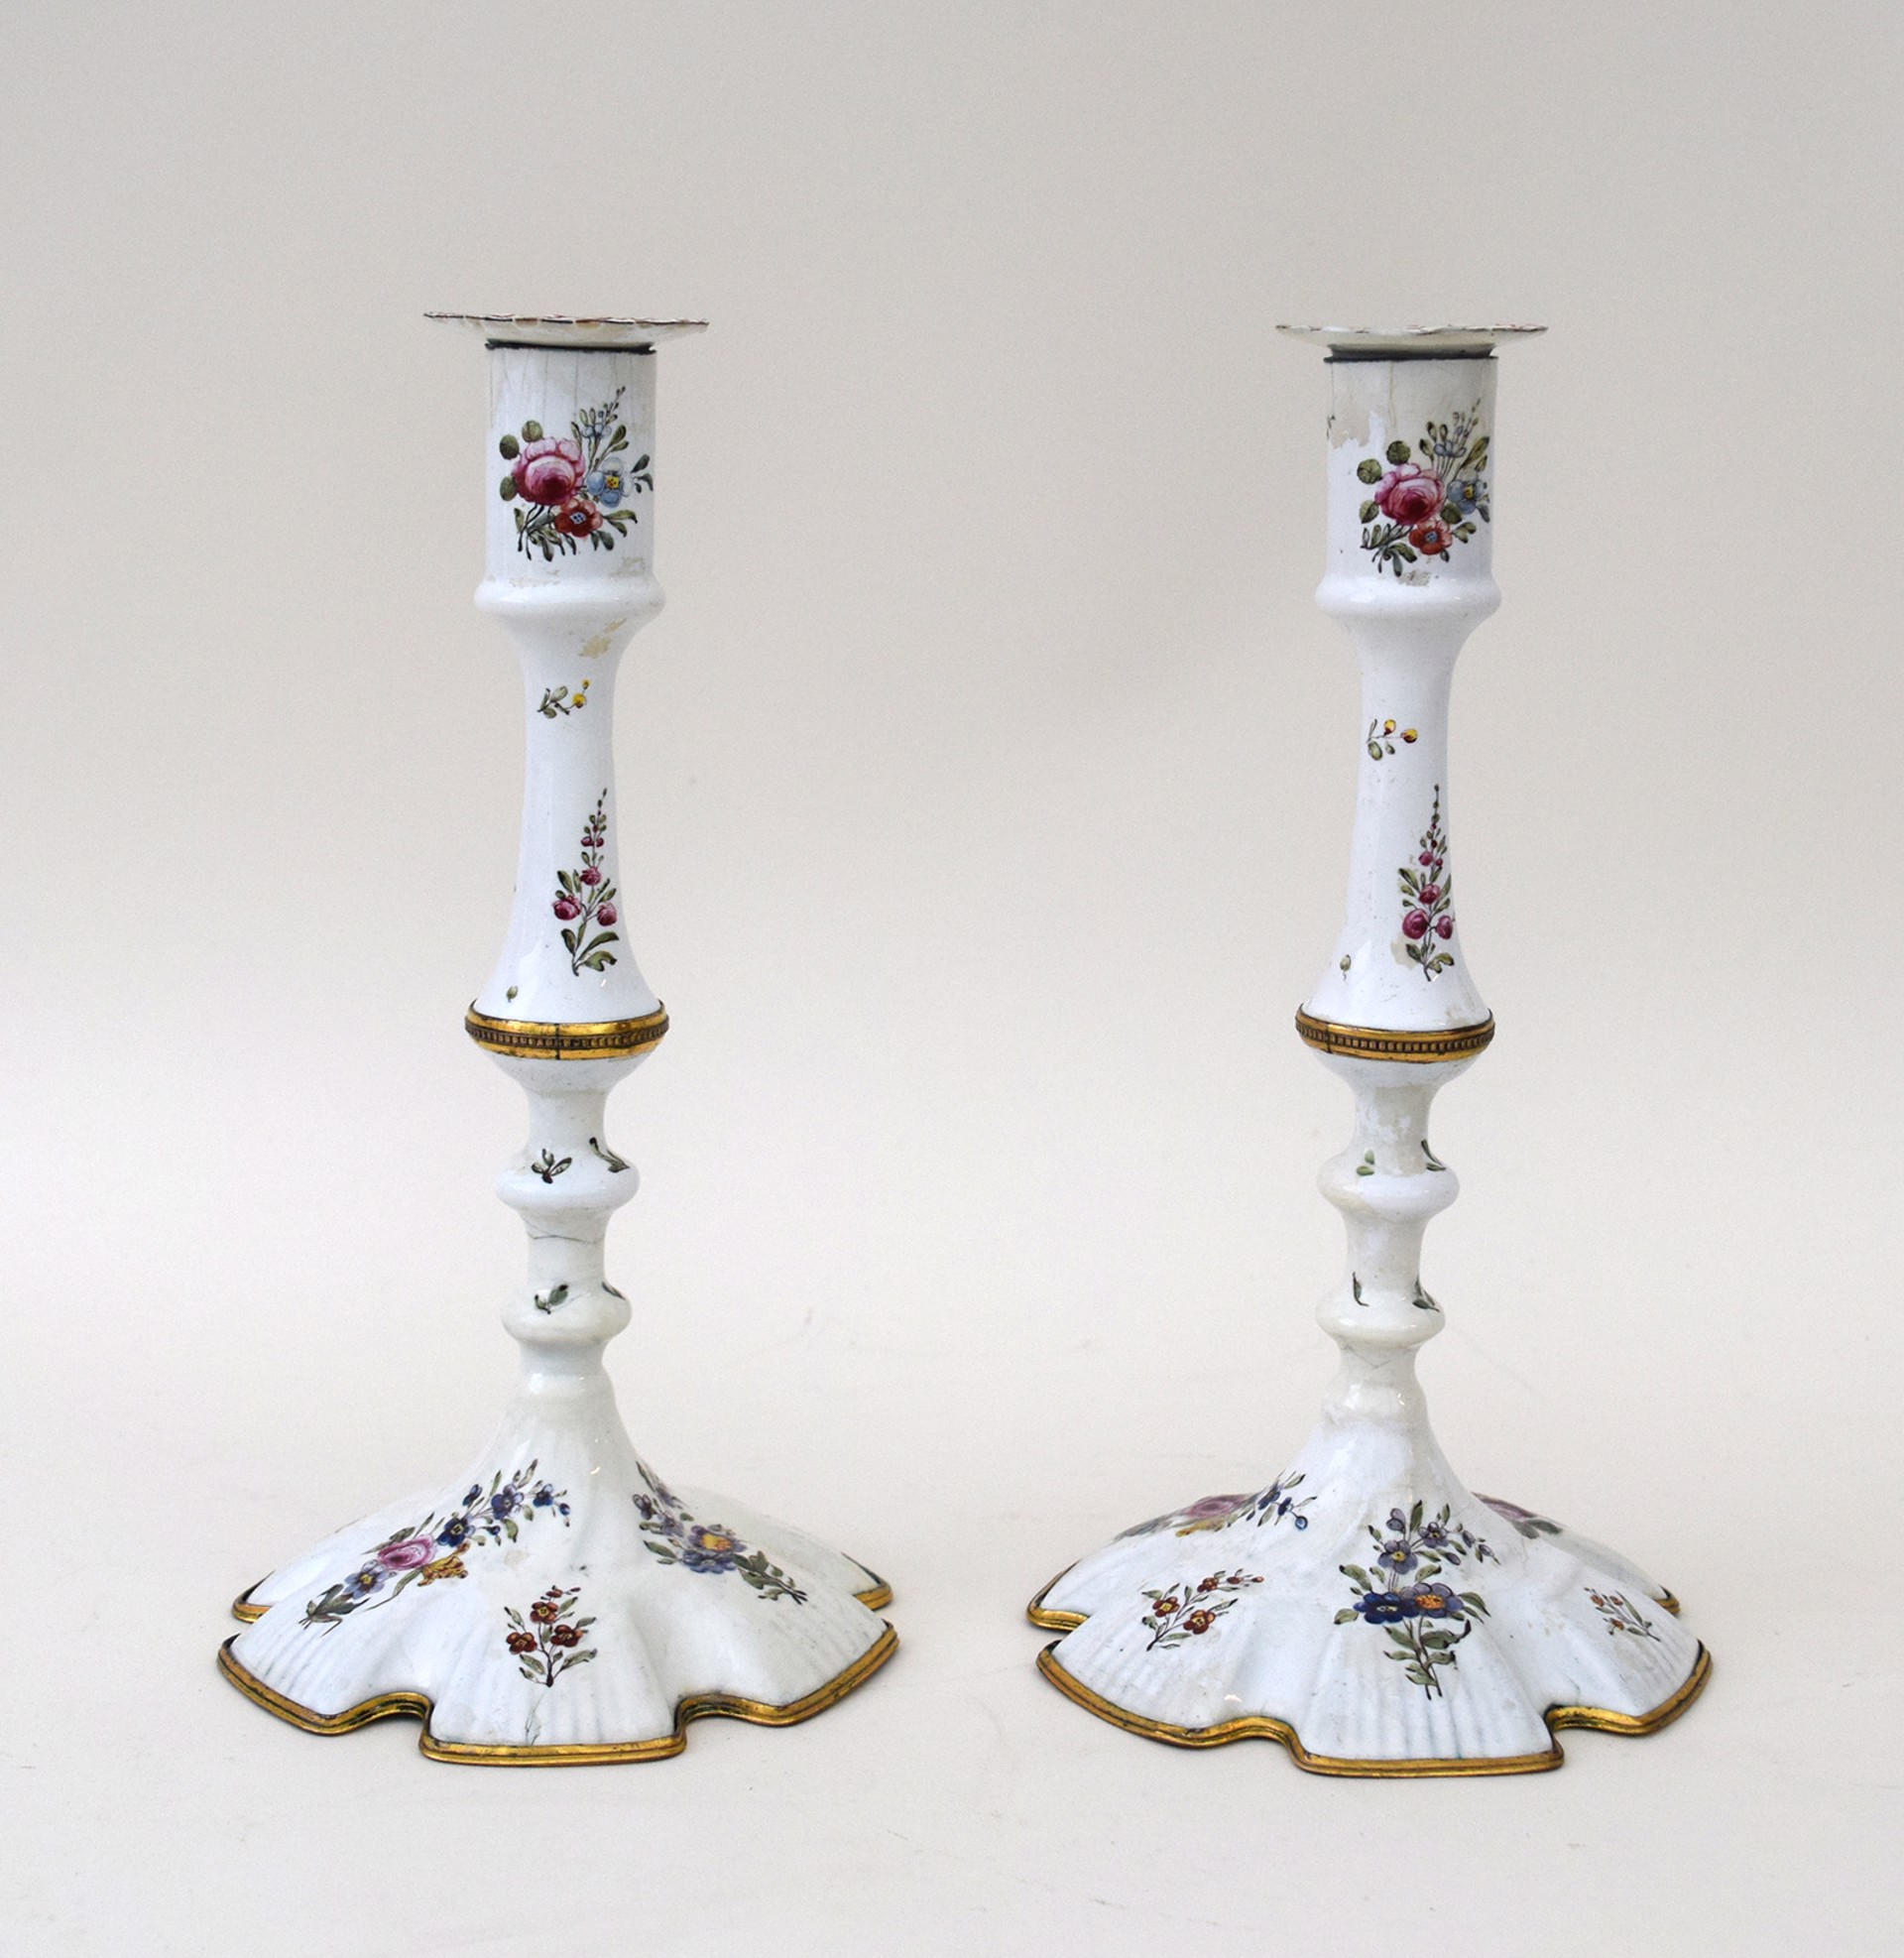 PAIR OF GILT-COPPER-MOUNTED SOUTH STAFFORDSHIRE ENAMEL CANDLESTICKS, PROBABLY BILSTON